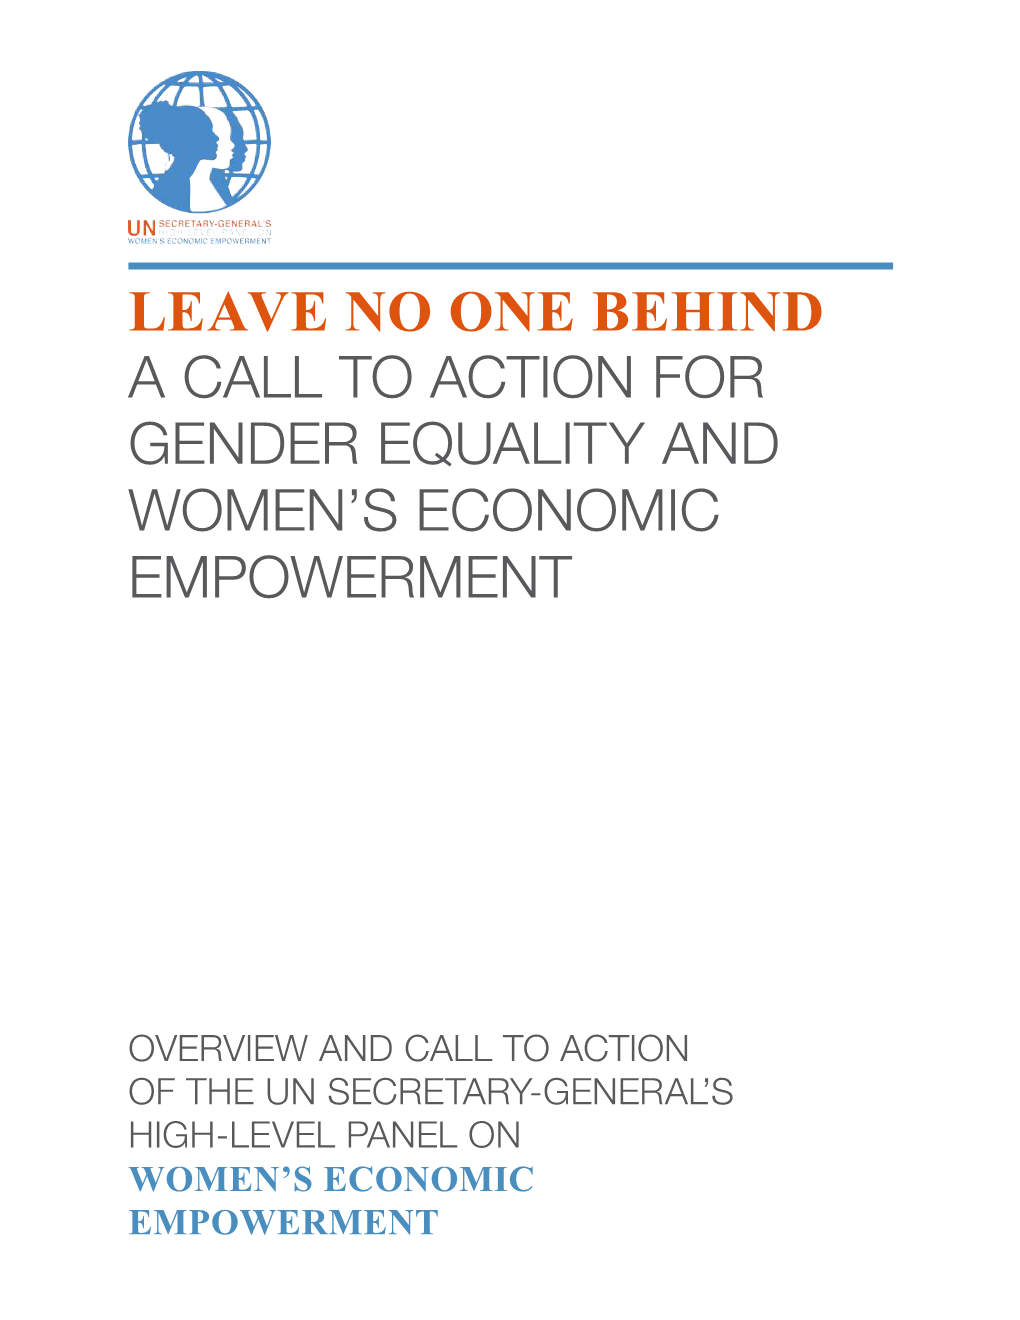 A Call to Action for Gender Equality and Women's Economic Empowerment